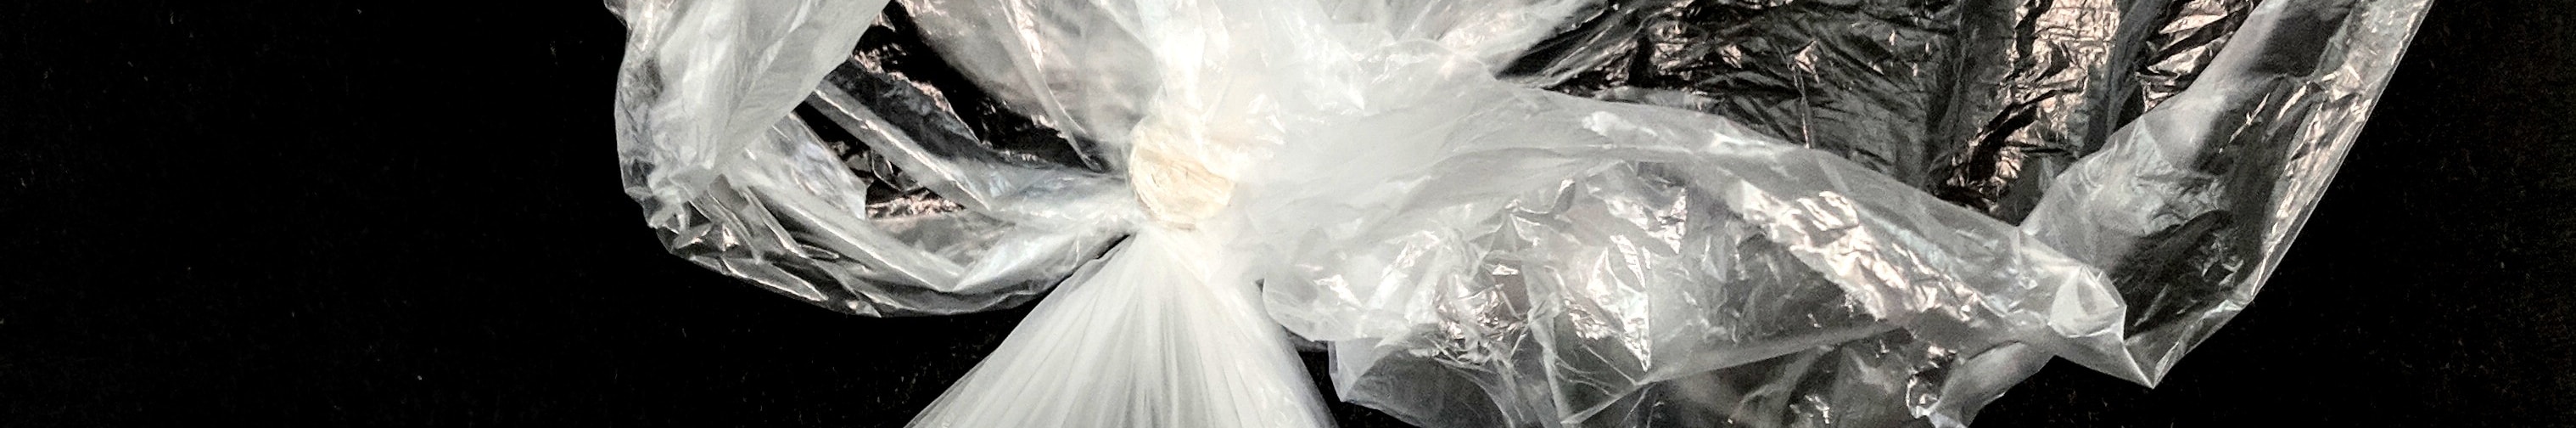 Costco generates 16.5Bn plastic grocery bags, equivalent to yearly waste of 107k Americans